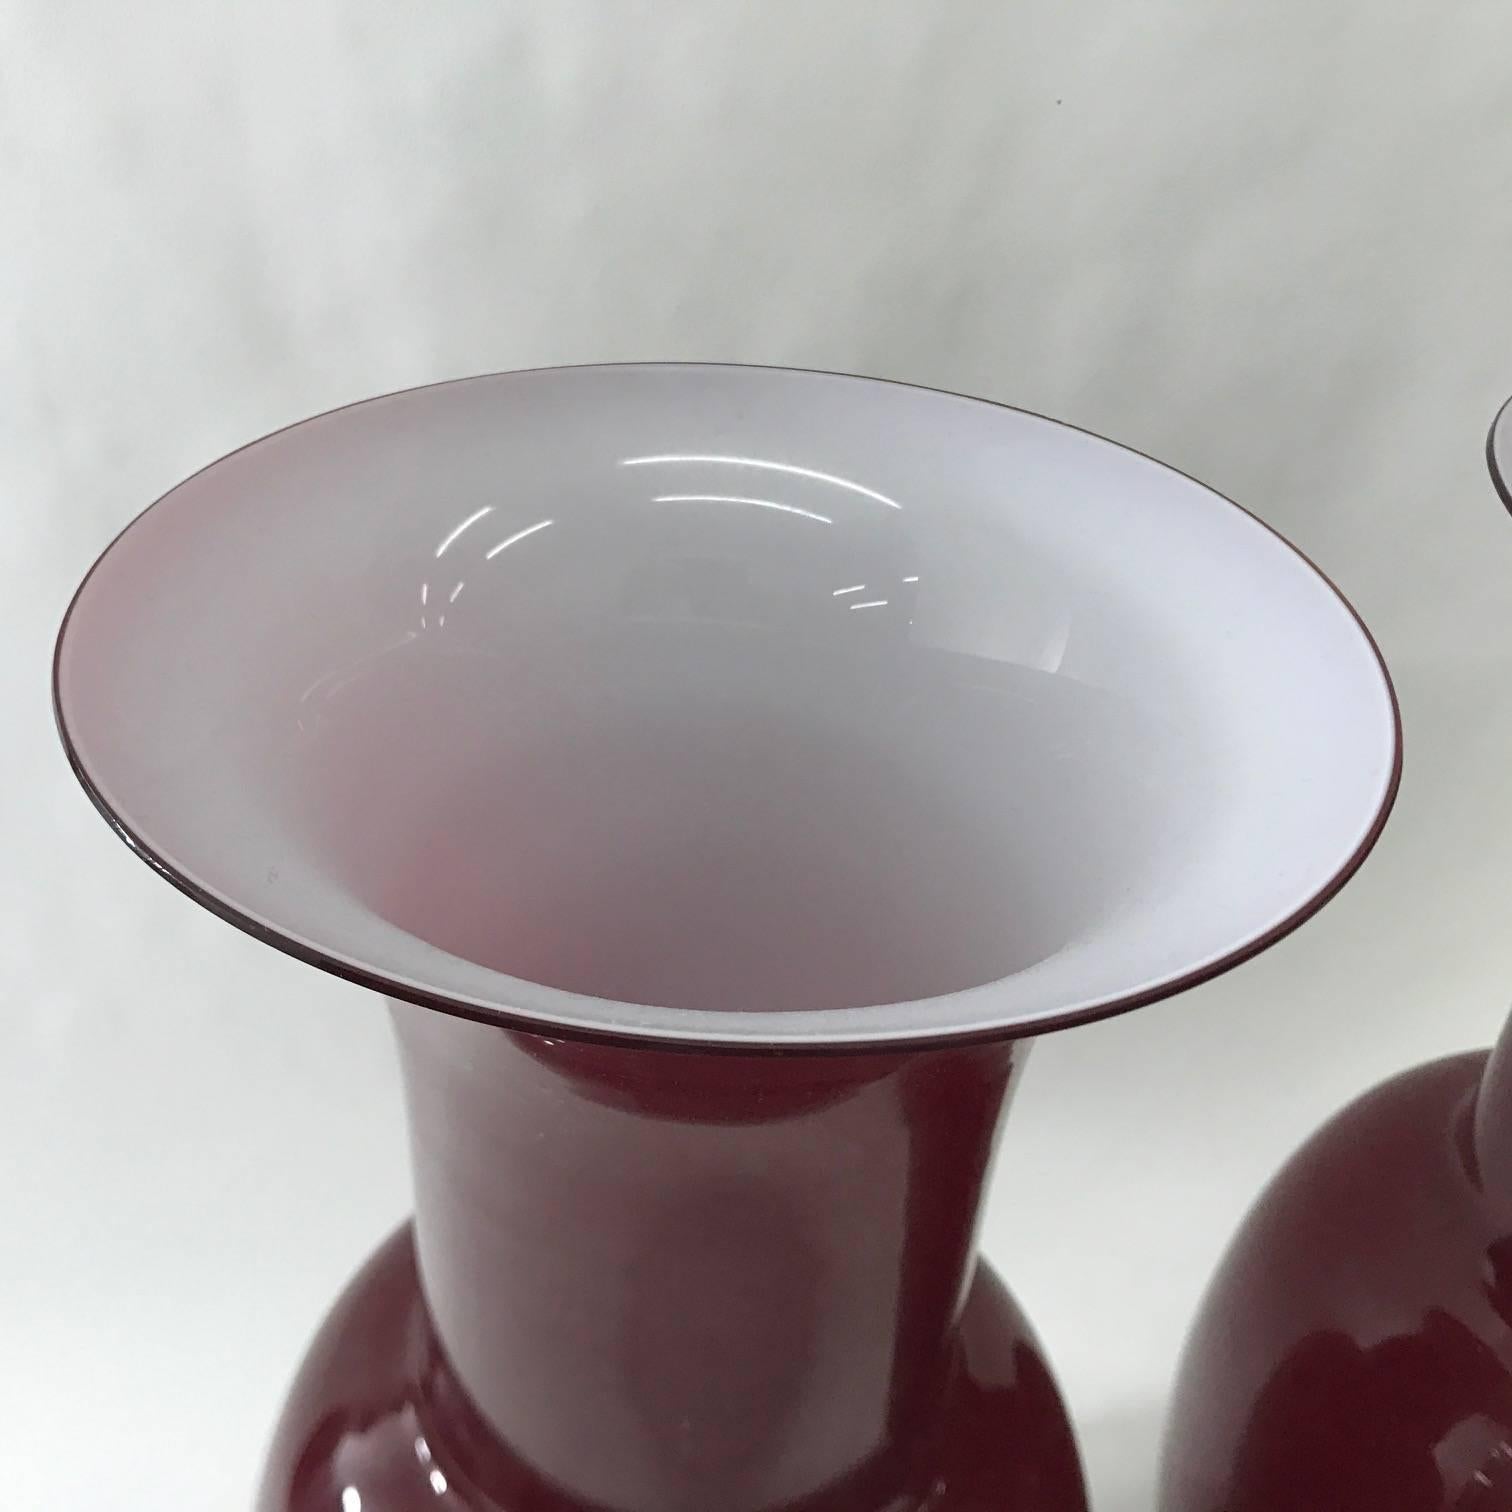 Pair of Murano glass vases signed by Aureliano Toso, made in 2001, red color and white inside, good conditions overall.